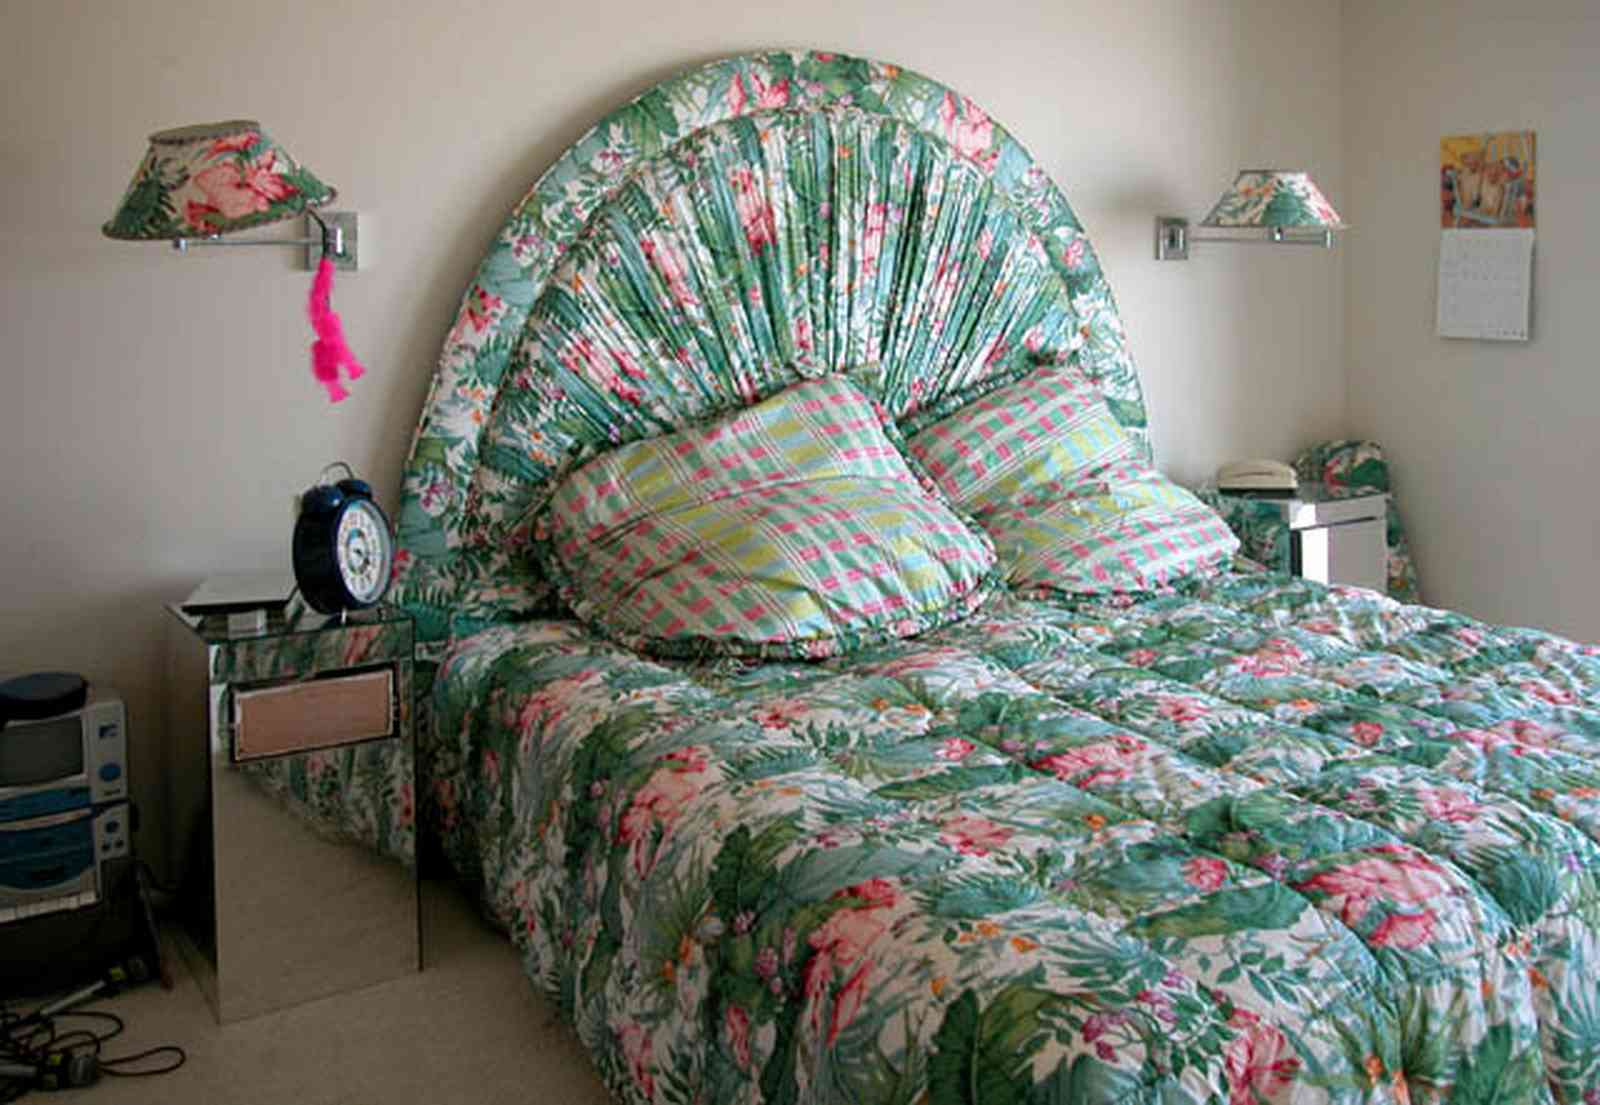 Pensacola-Beach:-1212-Ariola-Drive_19.jpg:  double bed, children's bedroom, beach house, chintz fabric, gulf of mexico